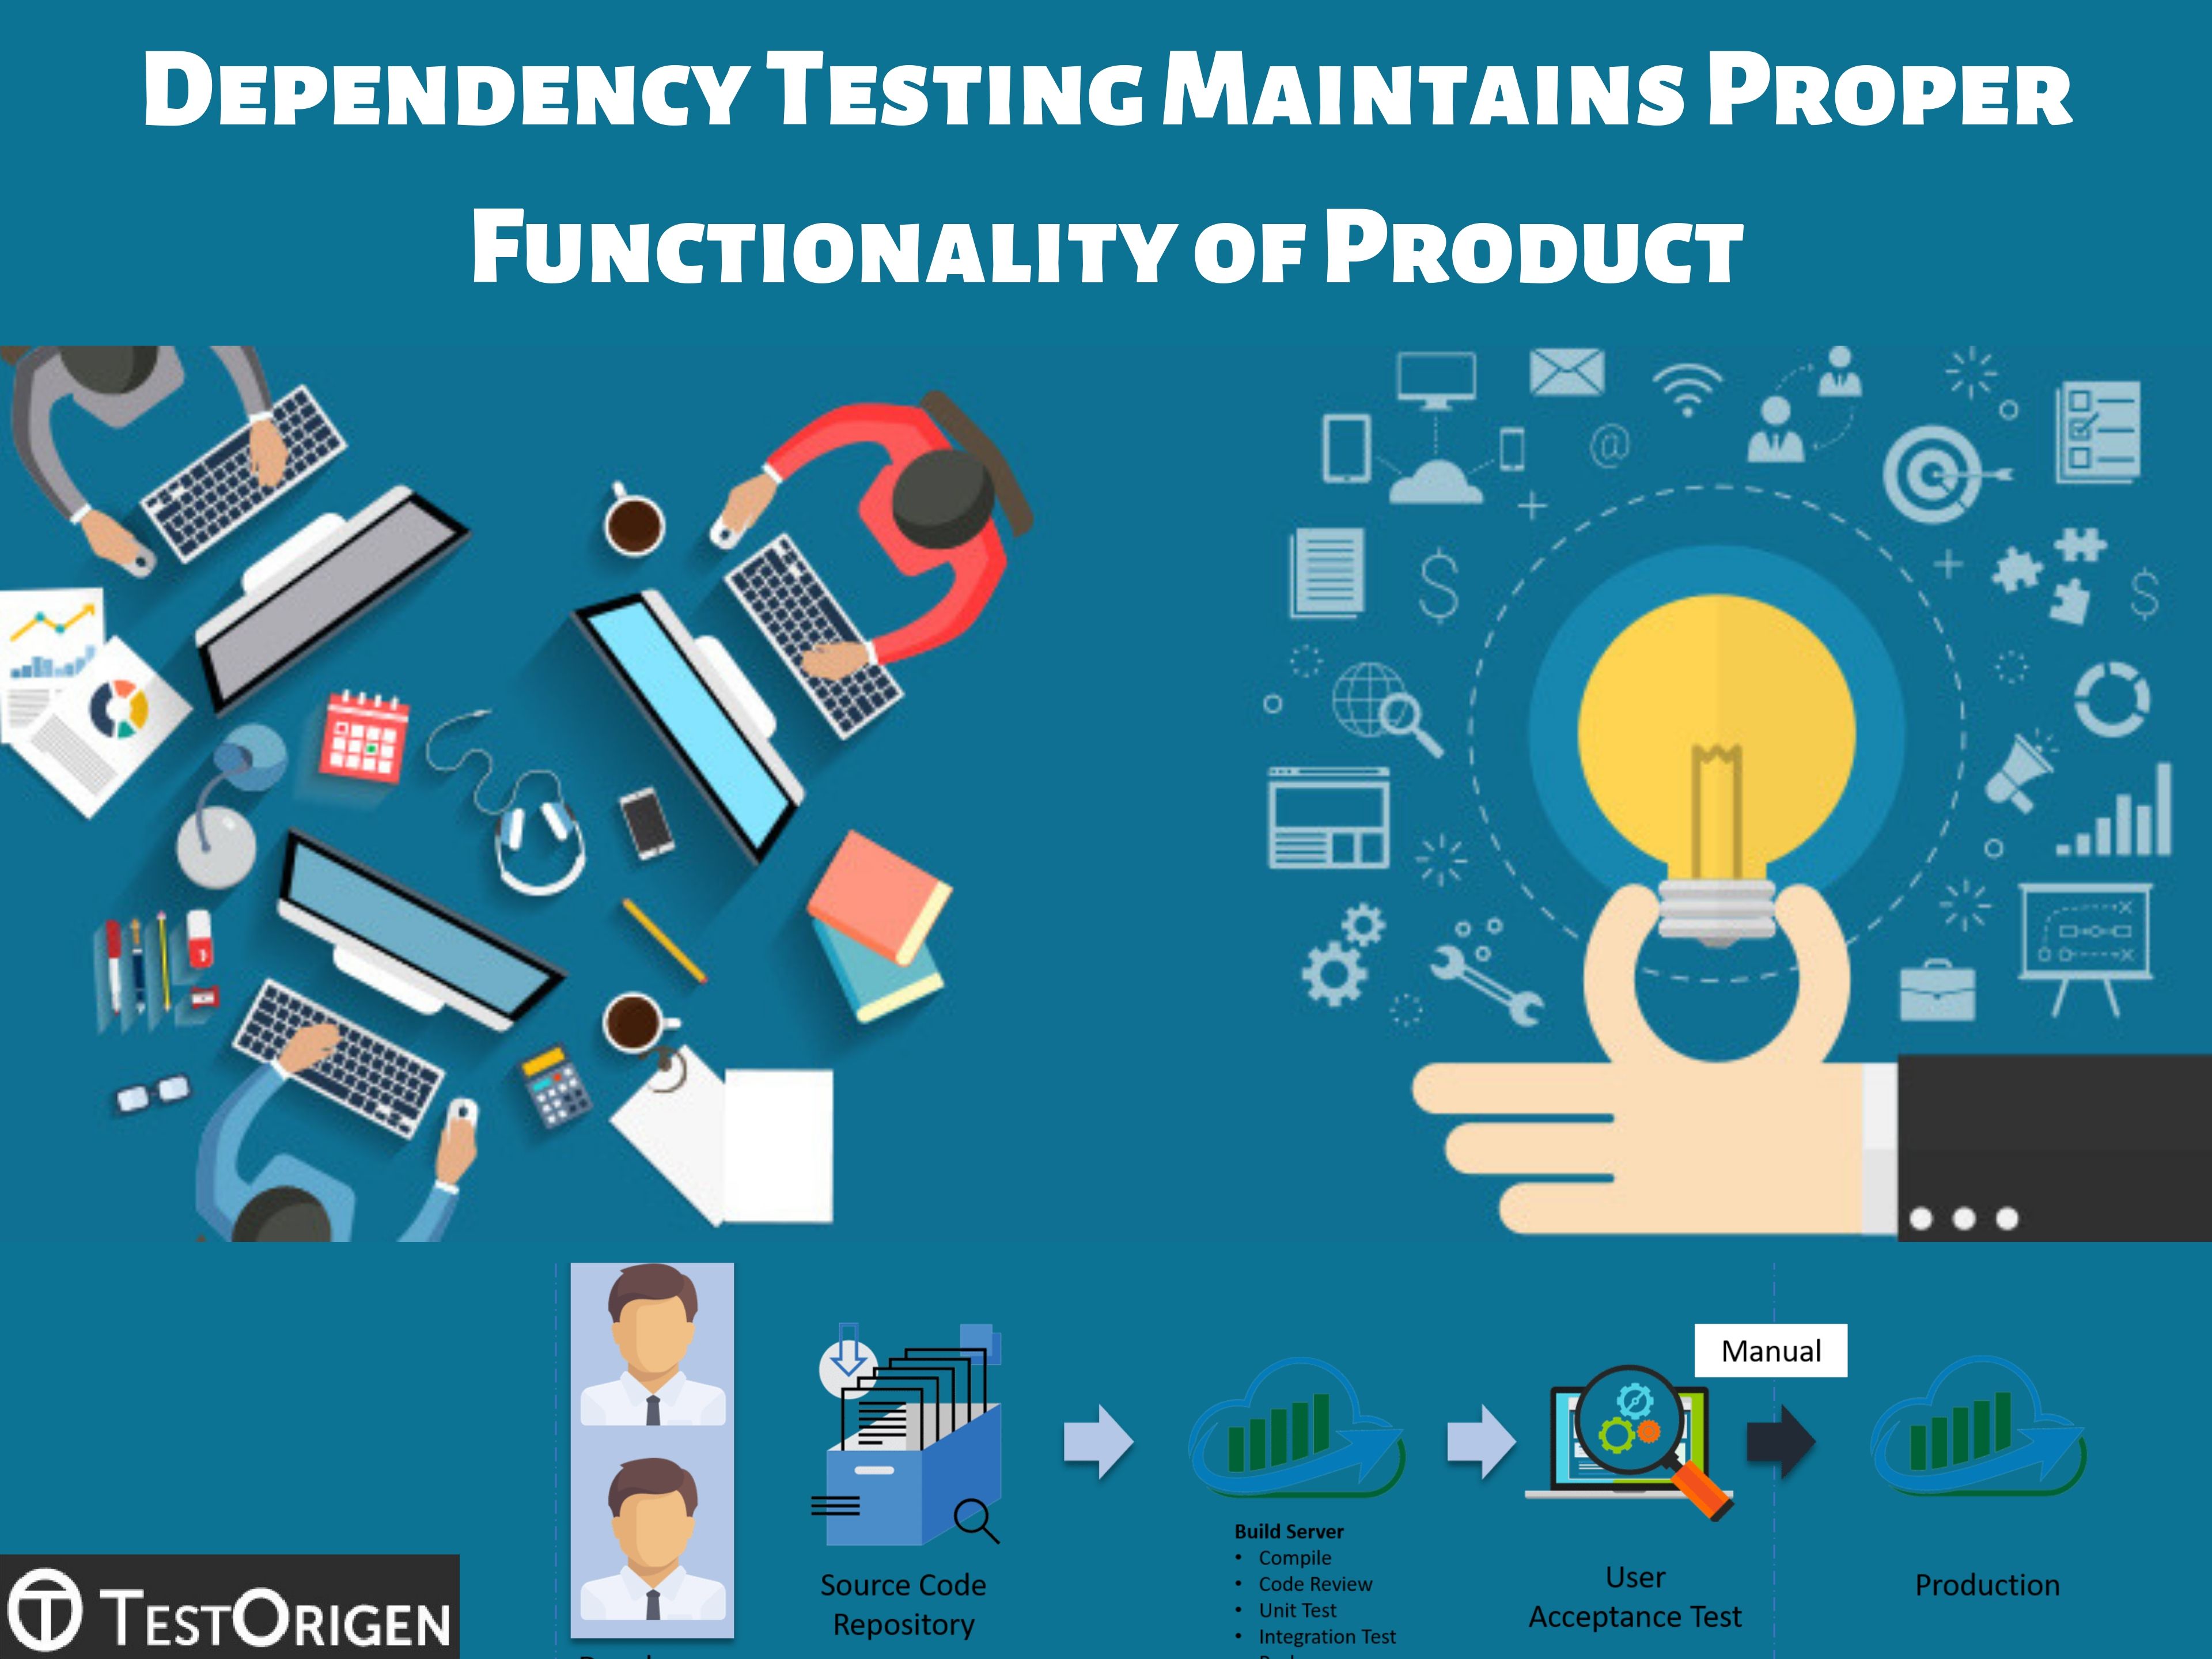 Dependency Testing Maintains Proper Functionality of Product